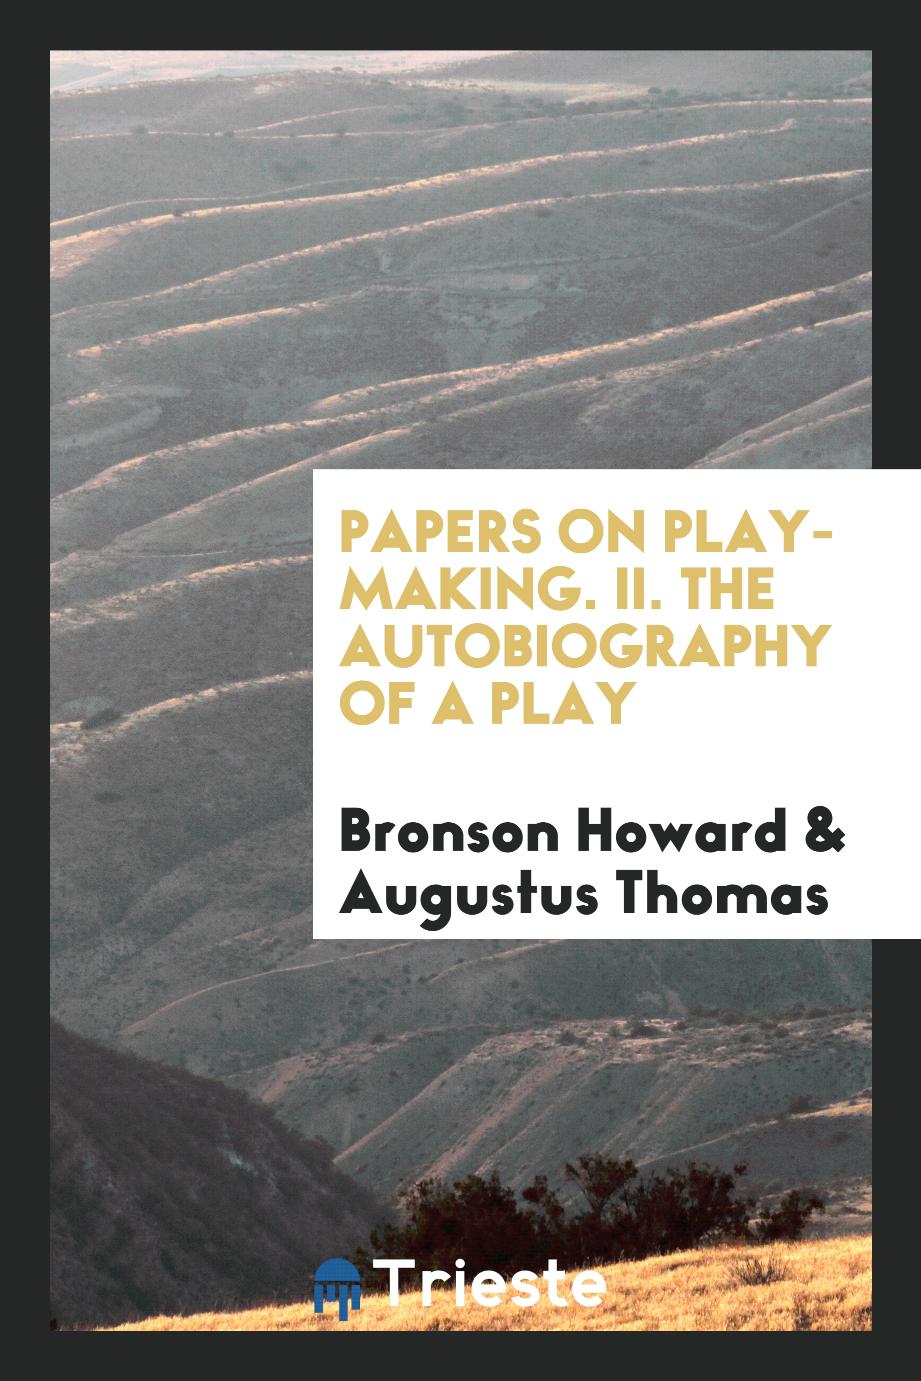 Papers on play-making. II. The Autobiography of a Play